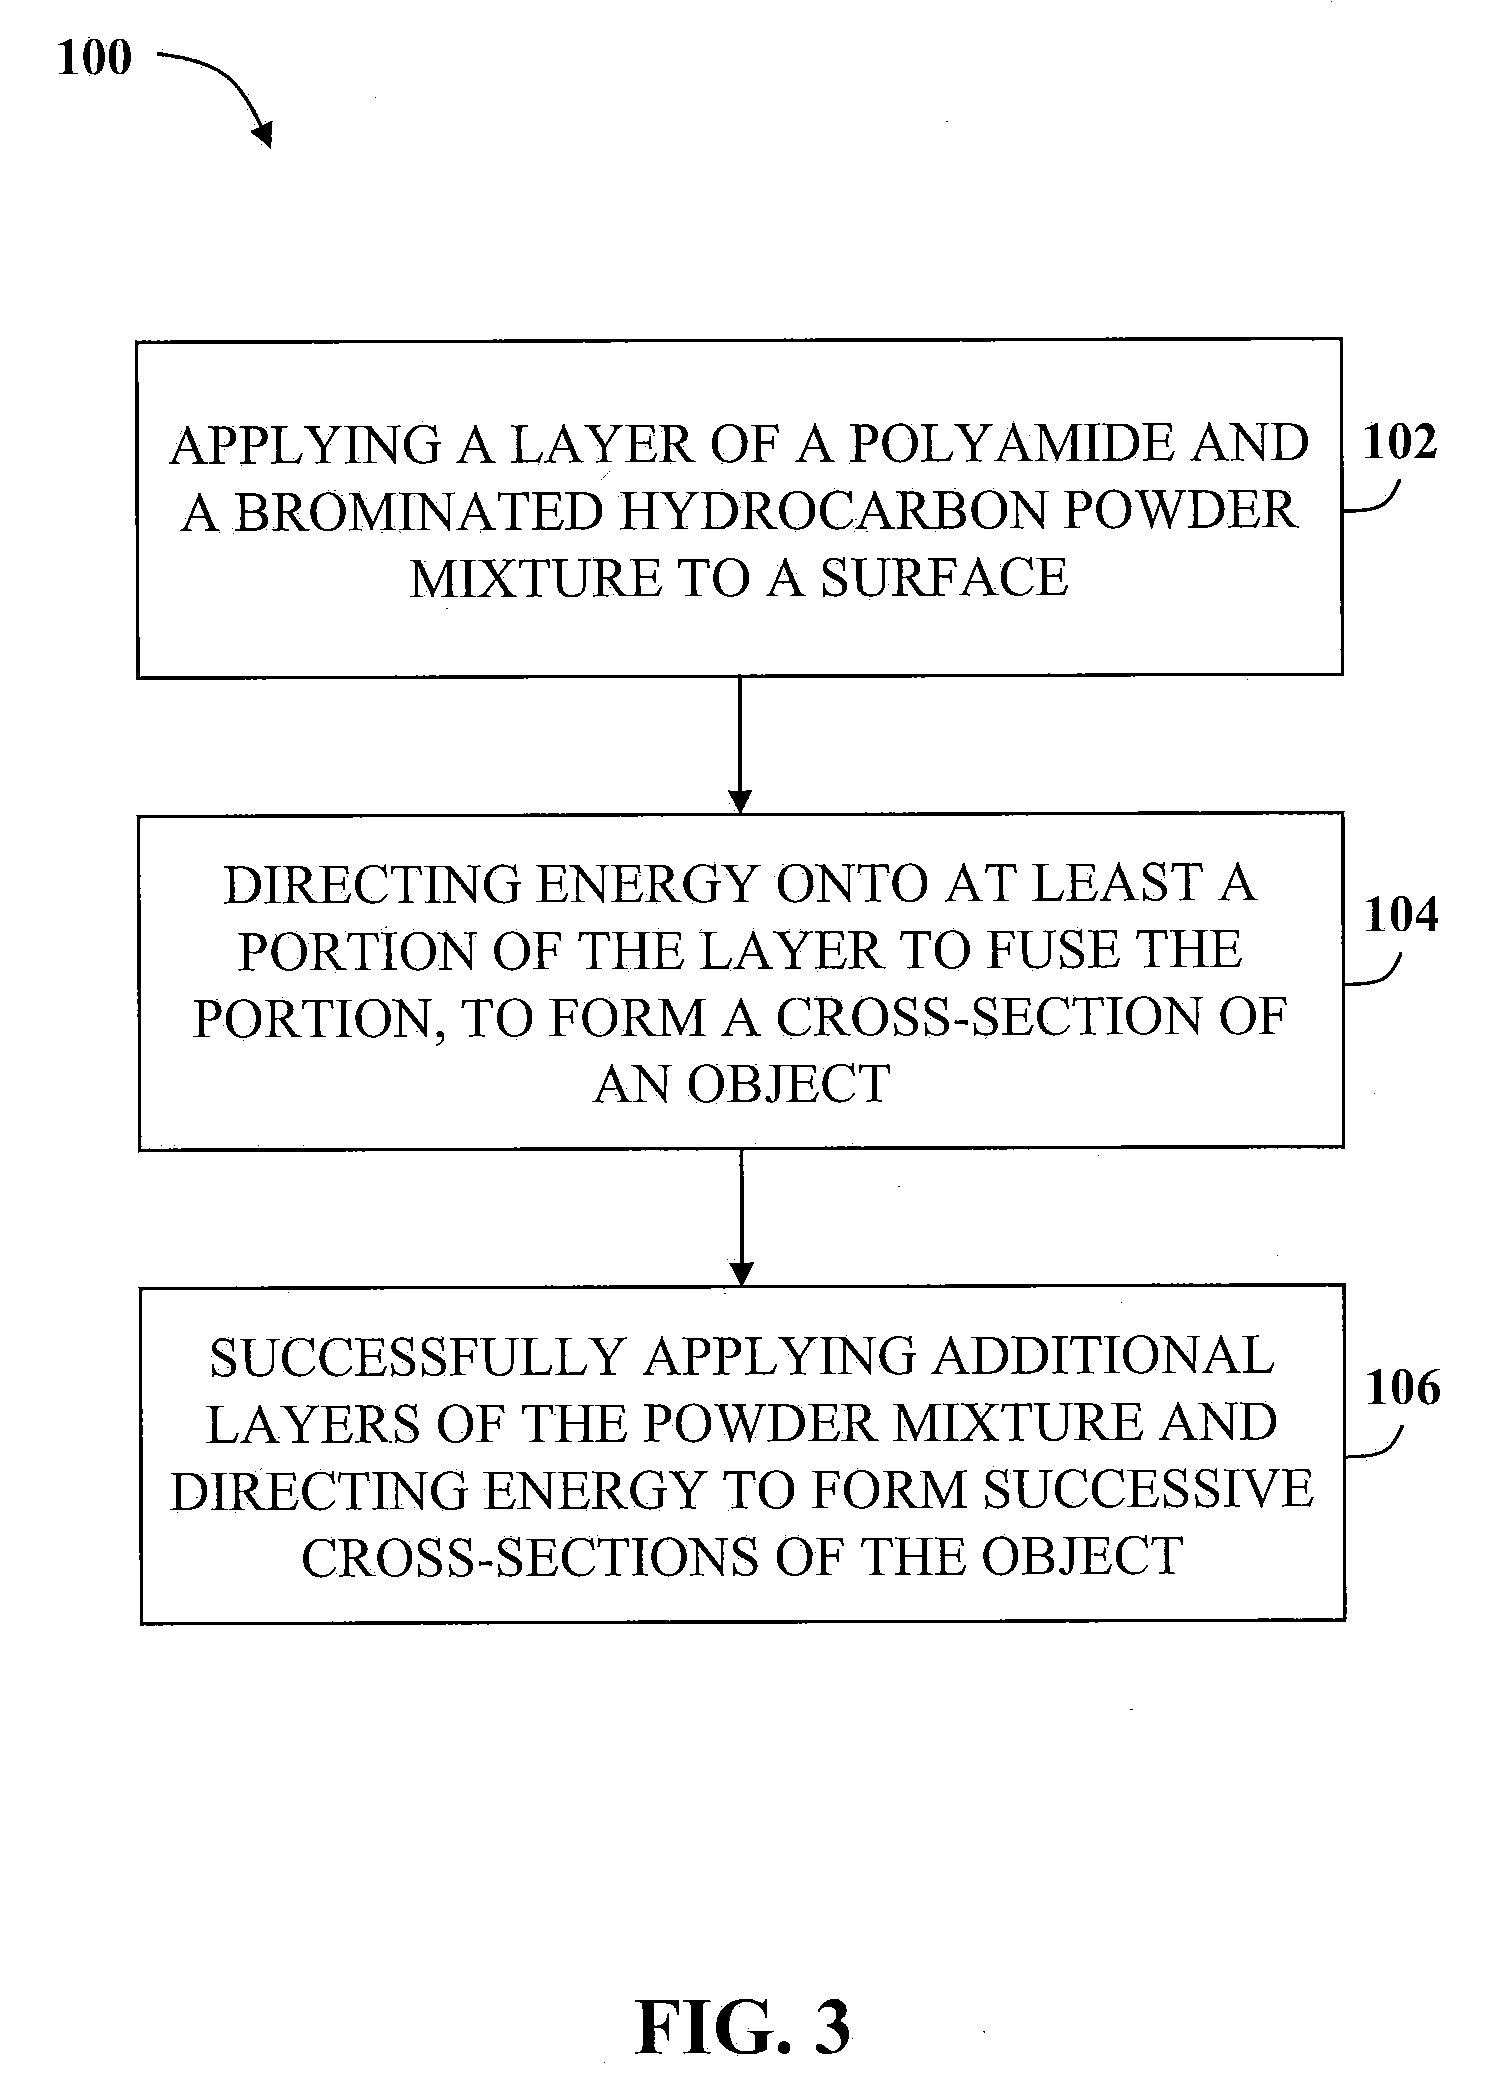 Methods and systems for fabricating fire retardant materials